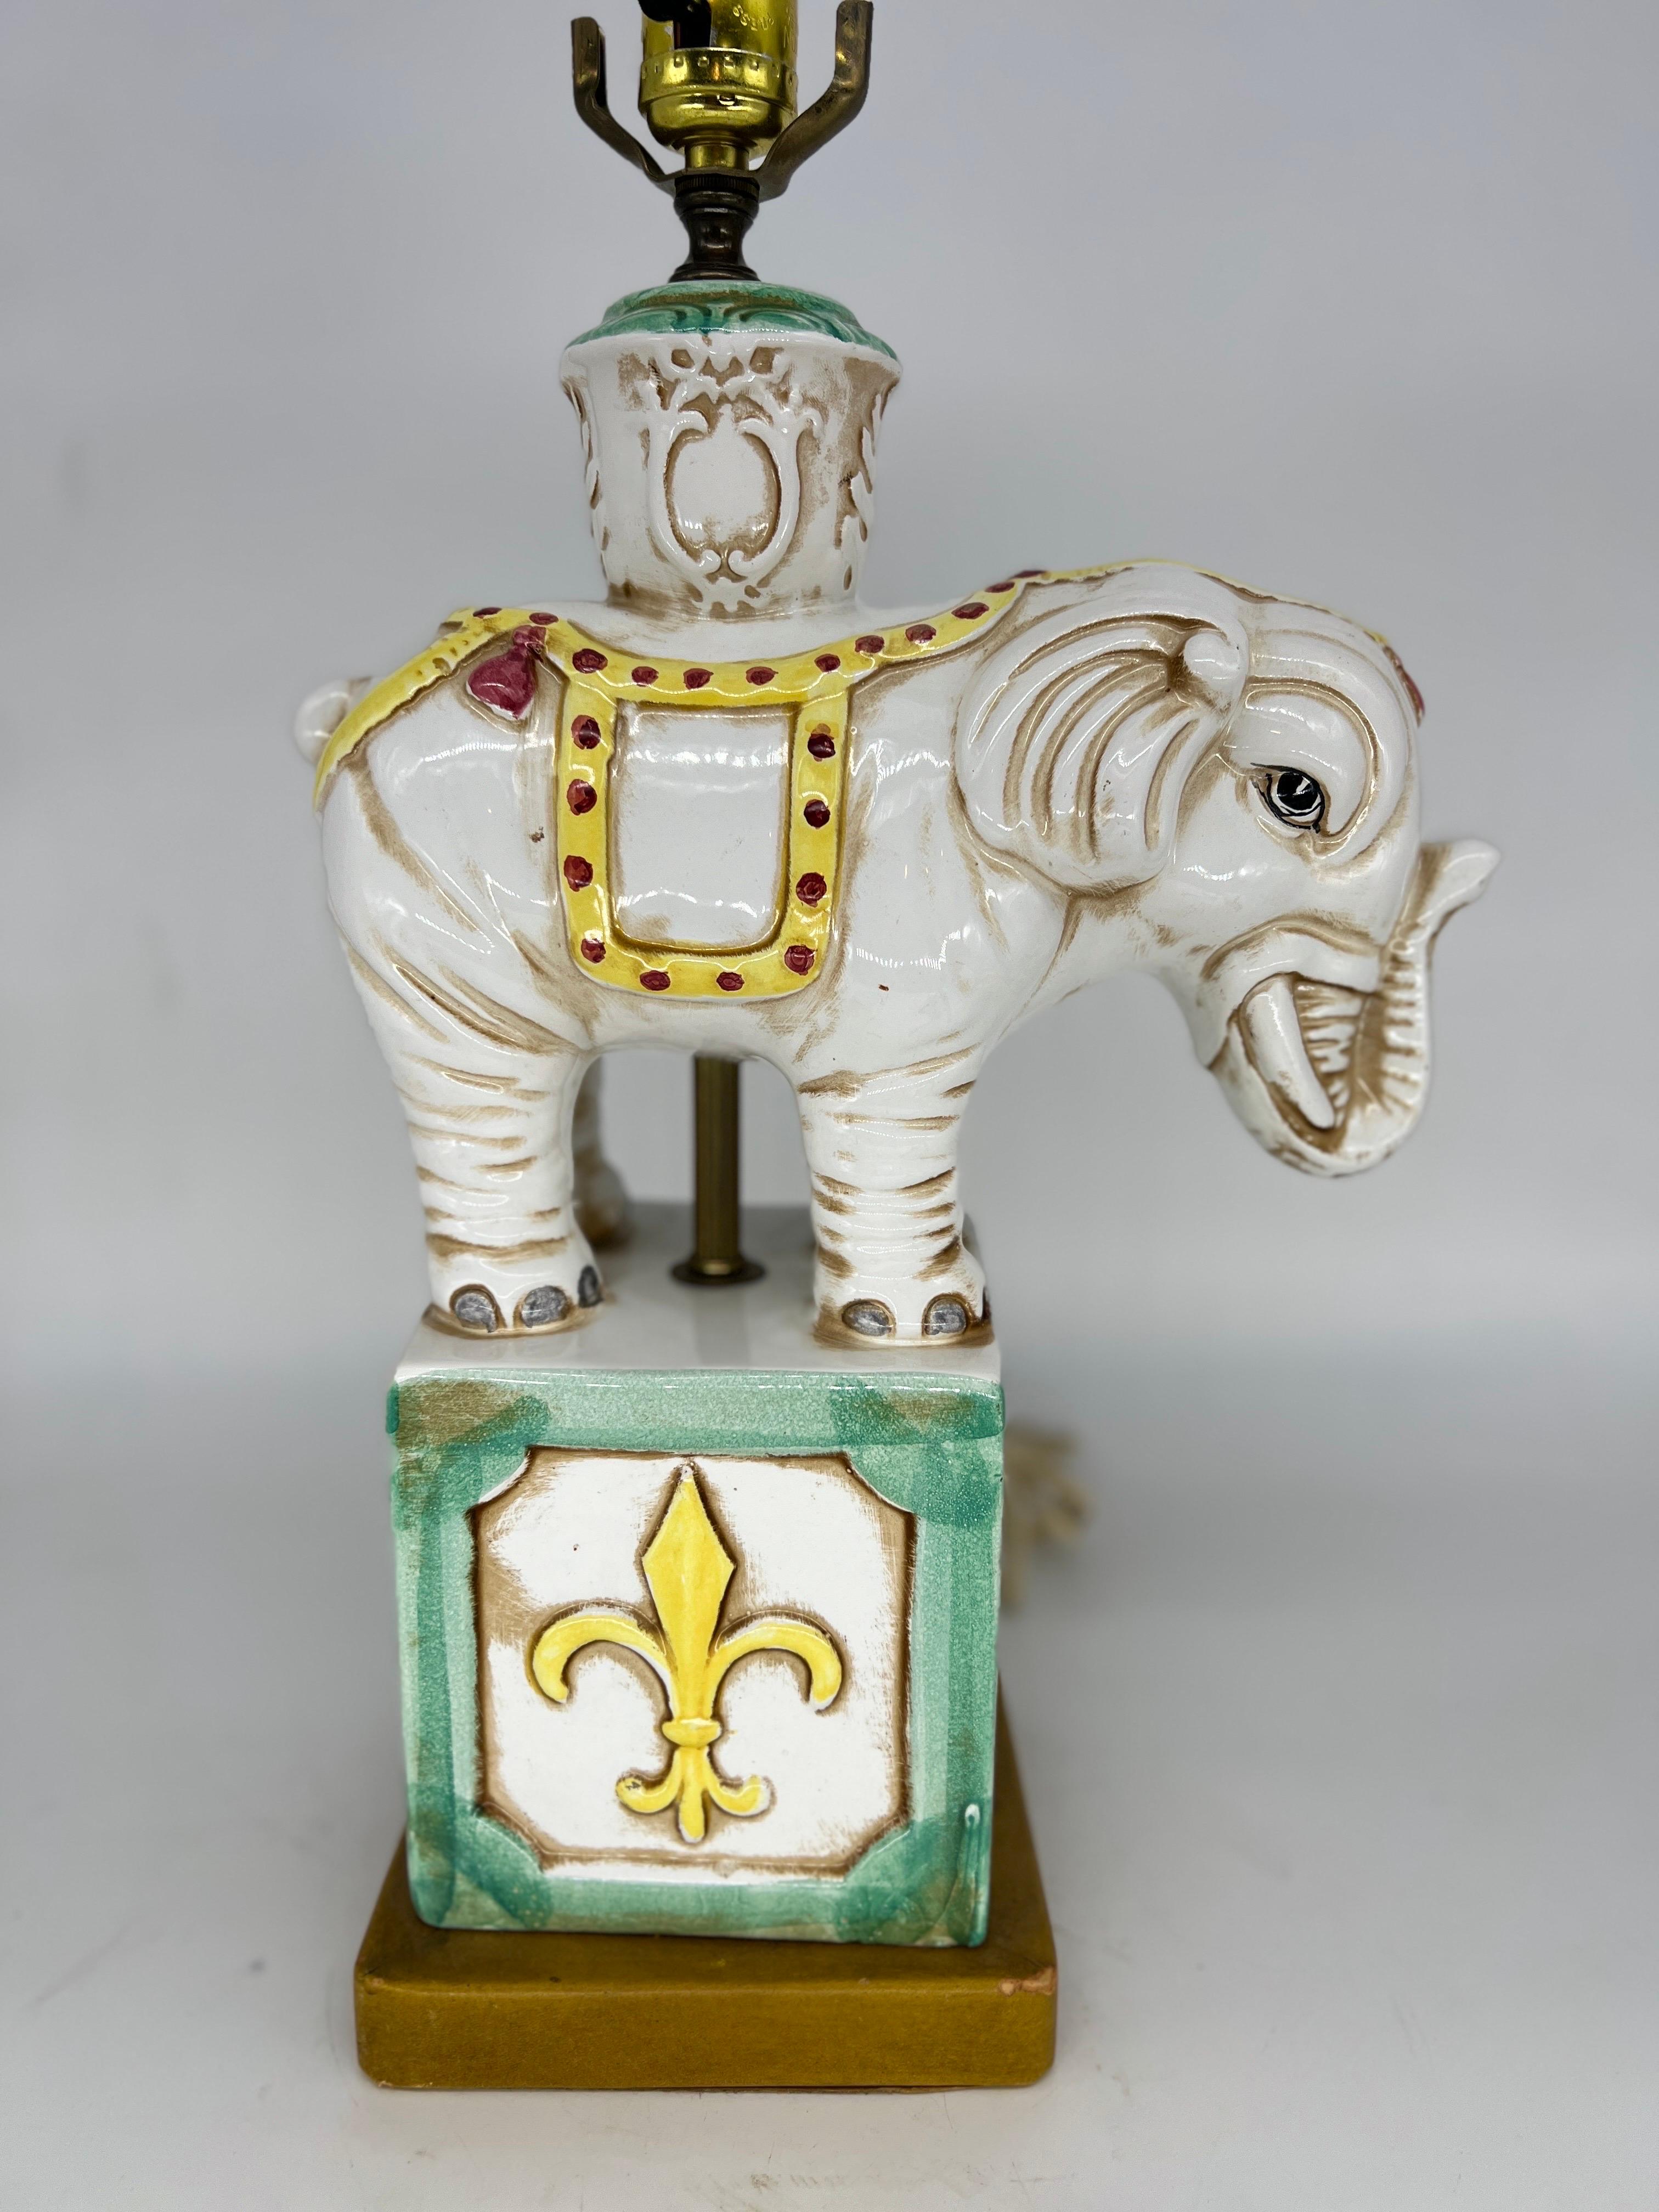 A great mid century ceramic table lamp in the form of an elephant. Fleur de lis style element to plinth and mounted to a leather base. Fully operational.